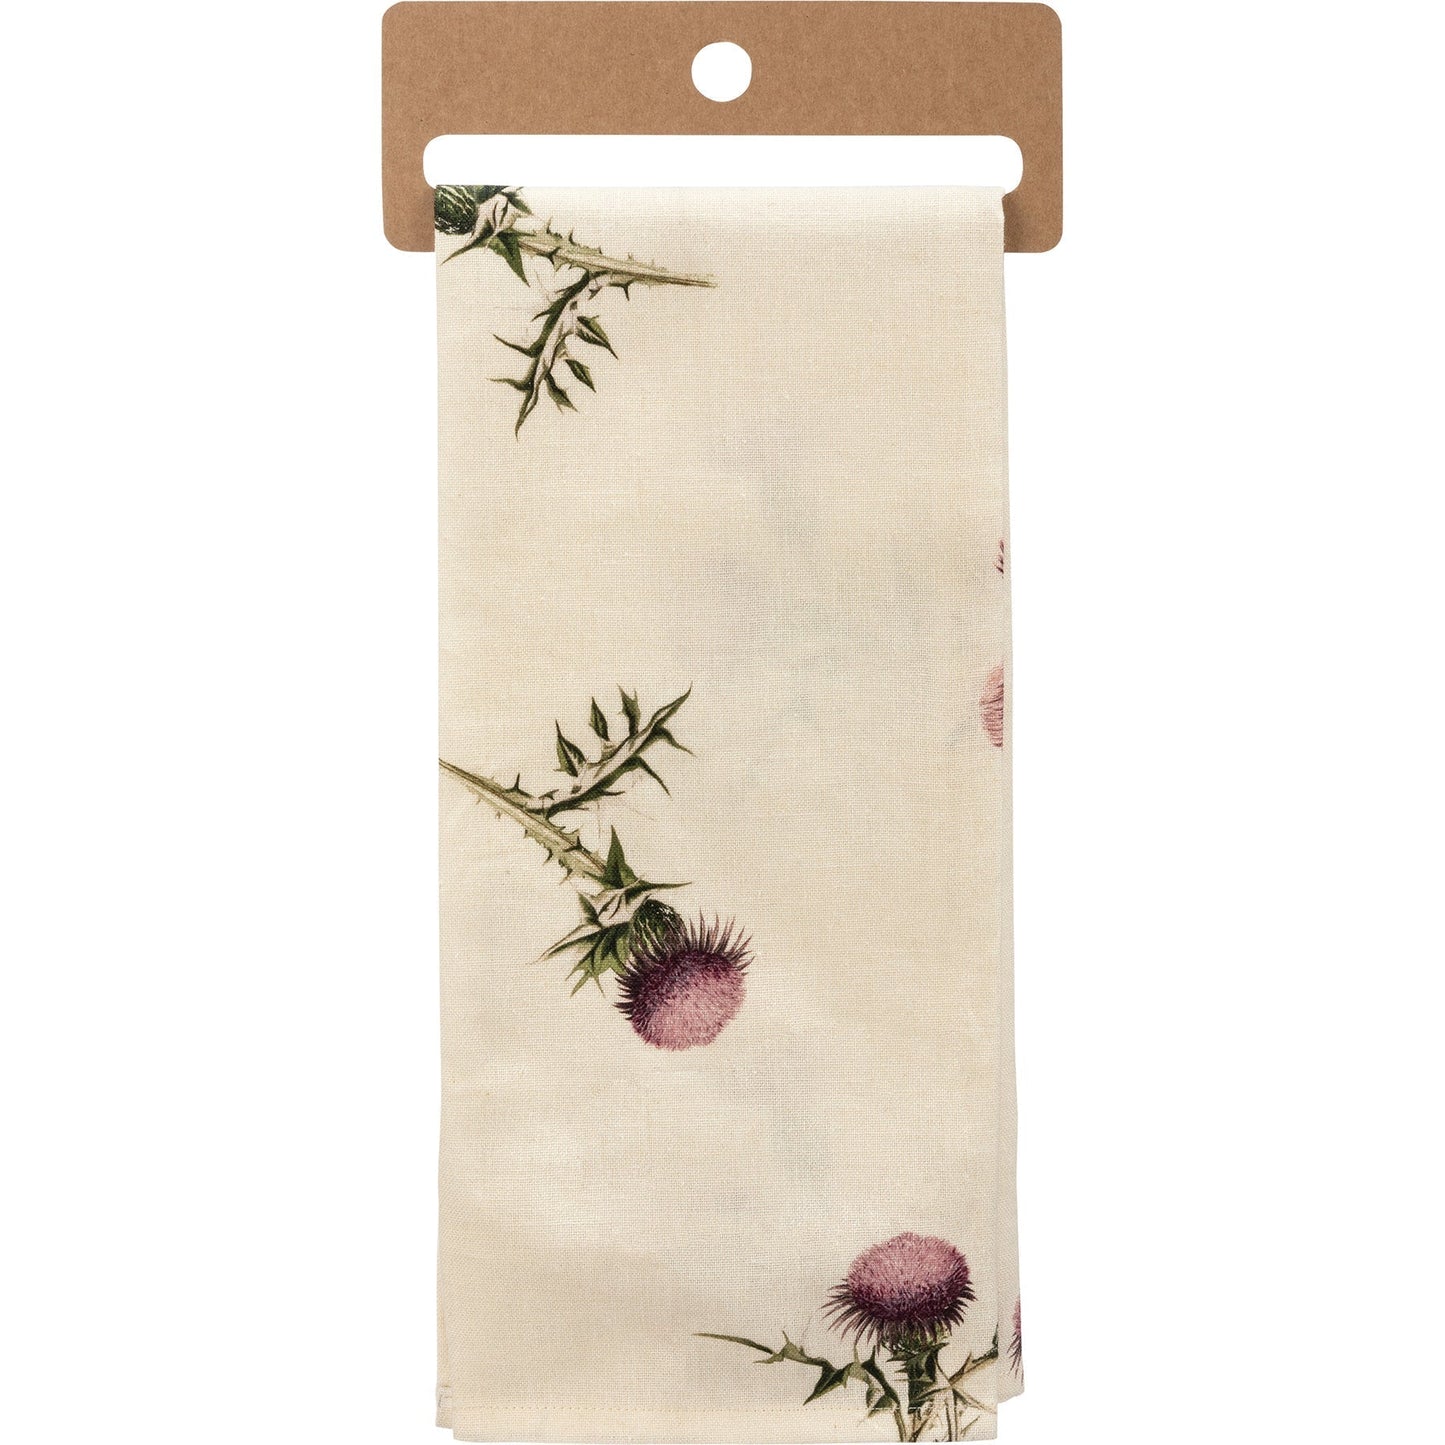 Thistle Be A Beautiful Day Punny Dish Cloth Towel | Cotten Linen Novelty Tea Towel | Cute Kitchen Hand Towel | 18" x 28"